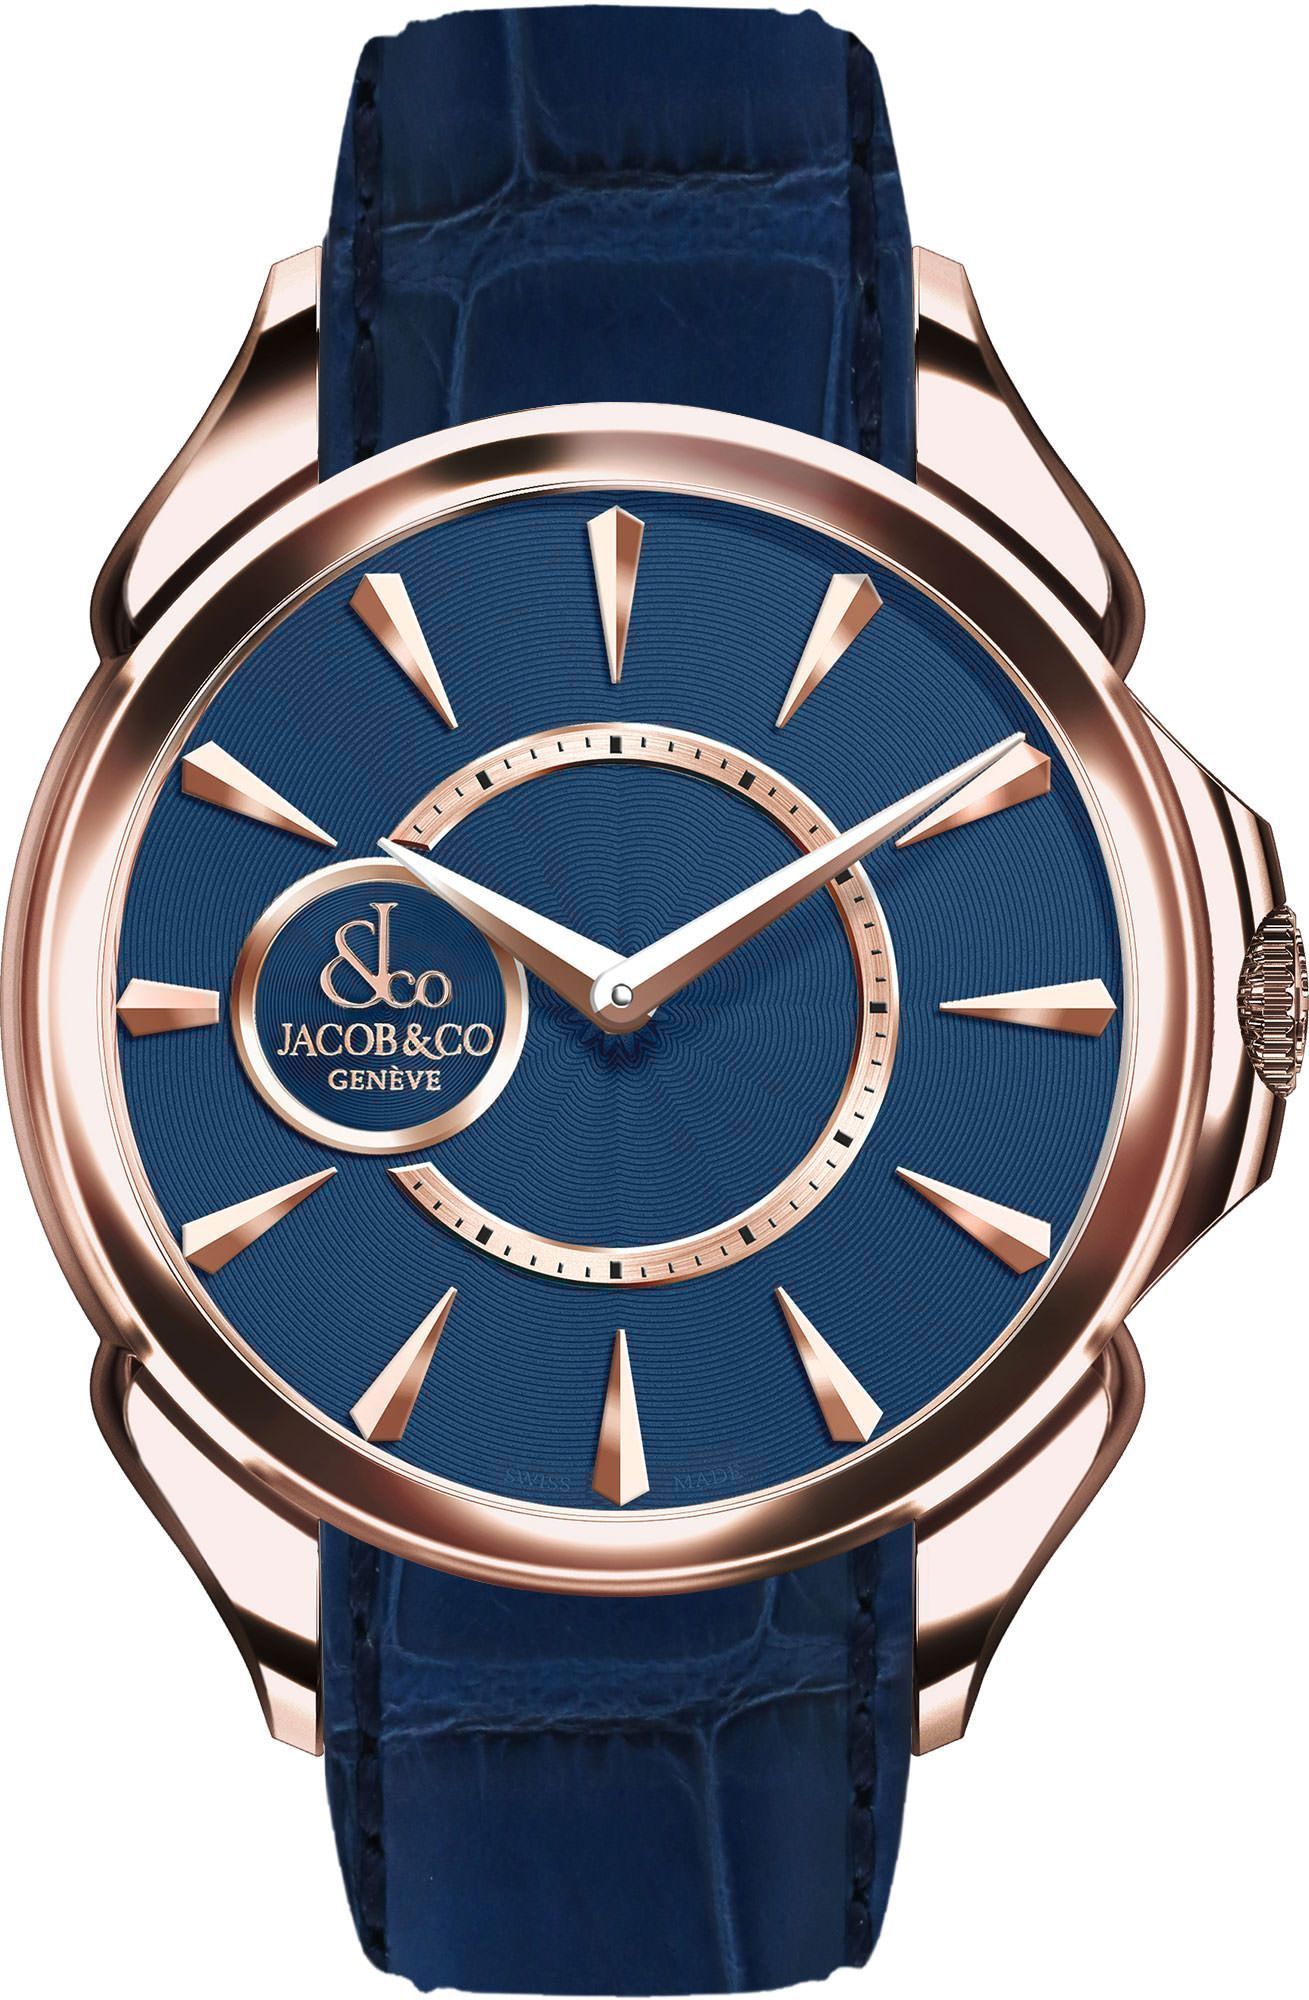 Jacob & Co. Palatial Classic Automatic 42 mm Watch in Blue Dial For Men - 1